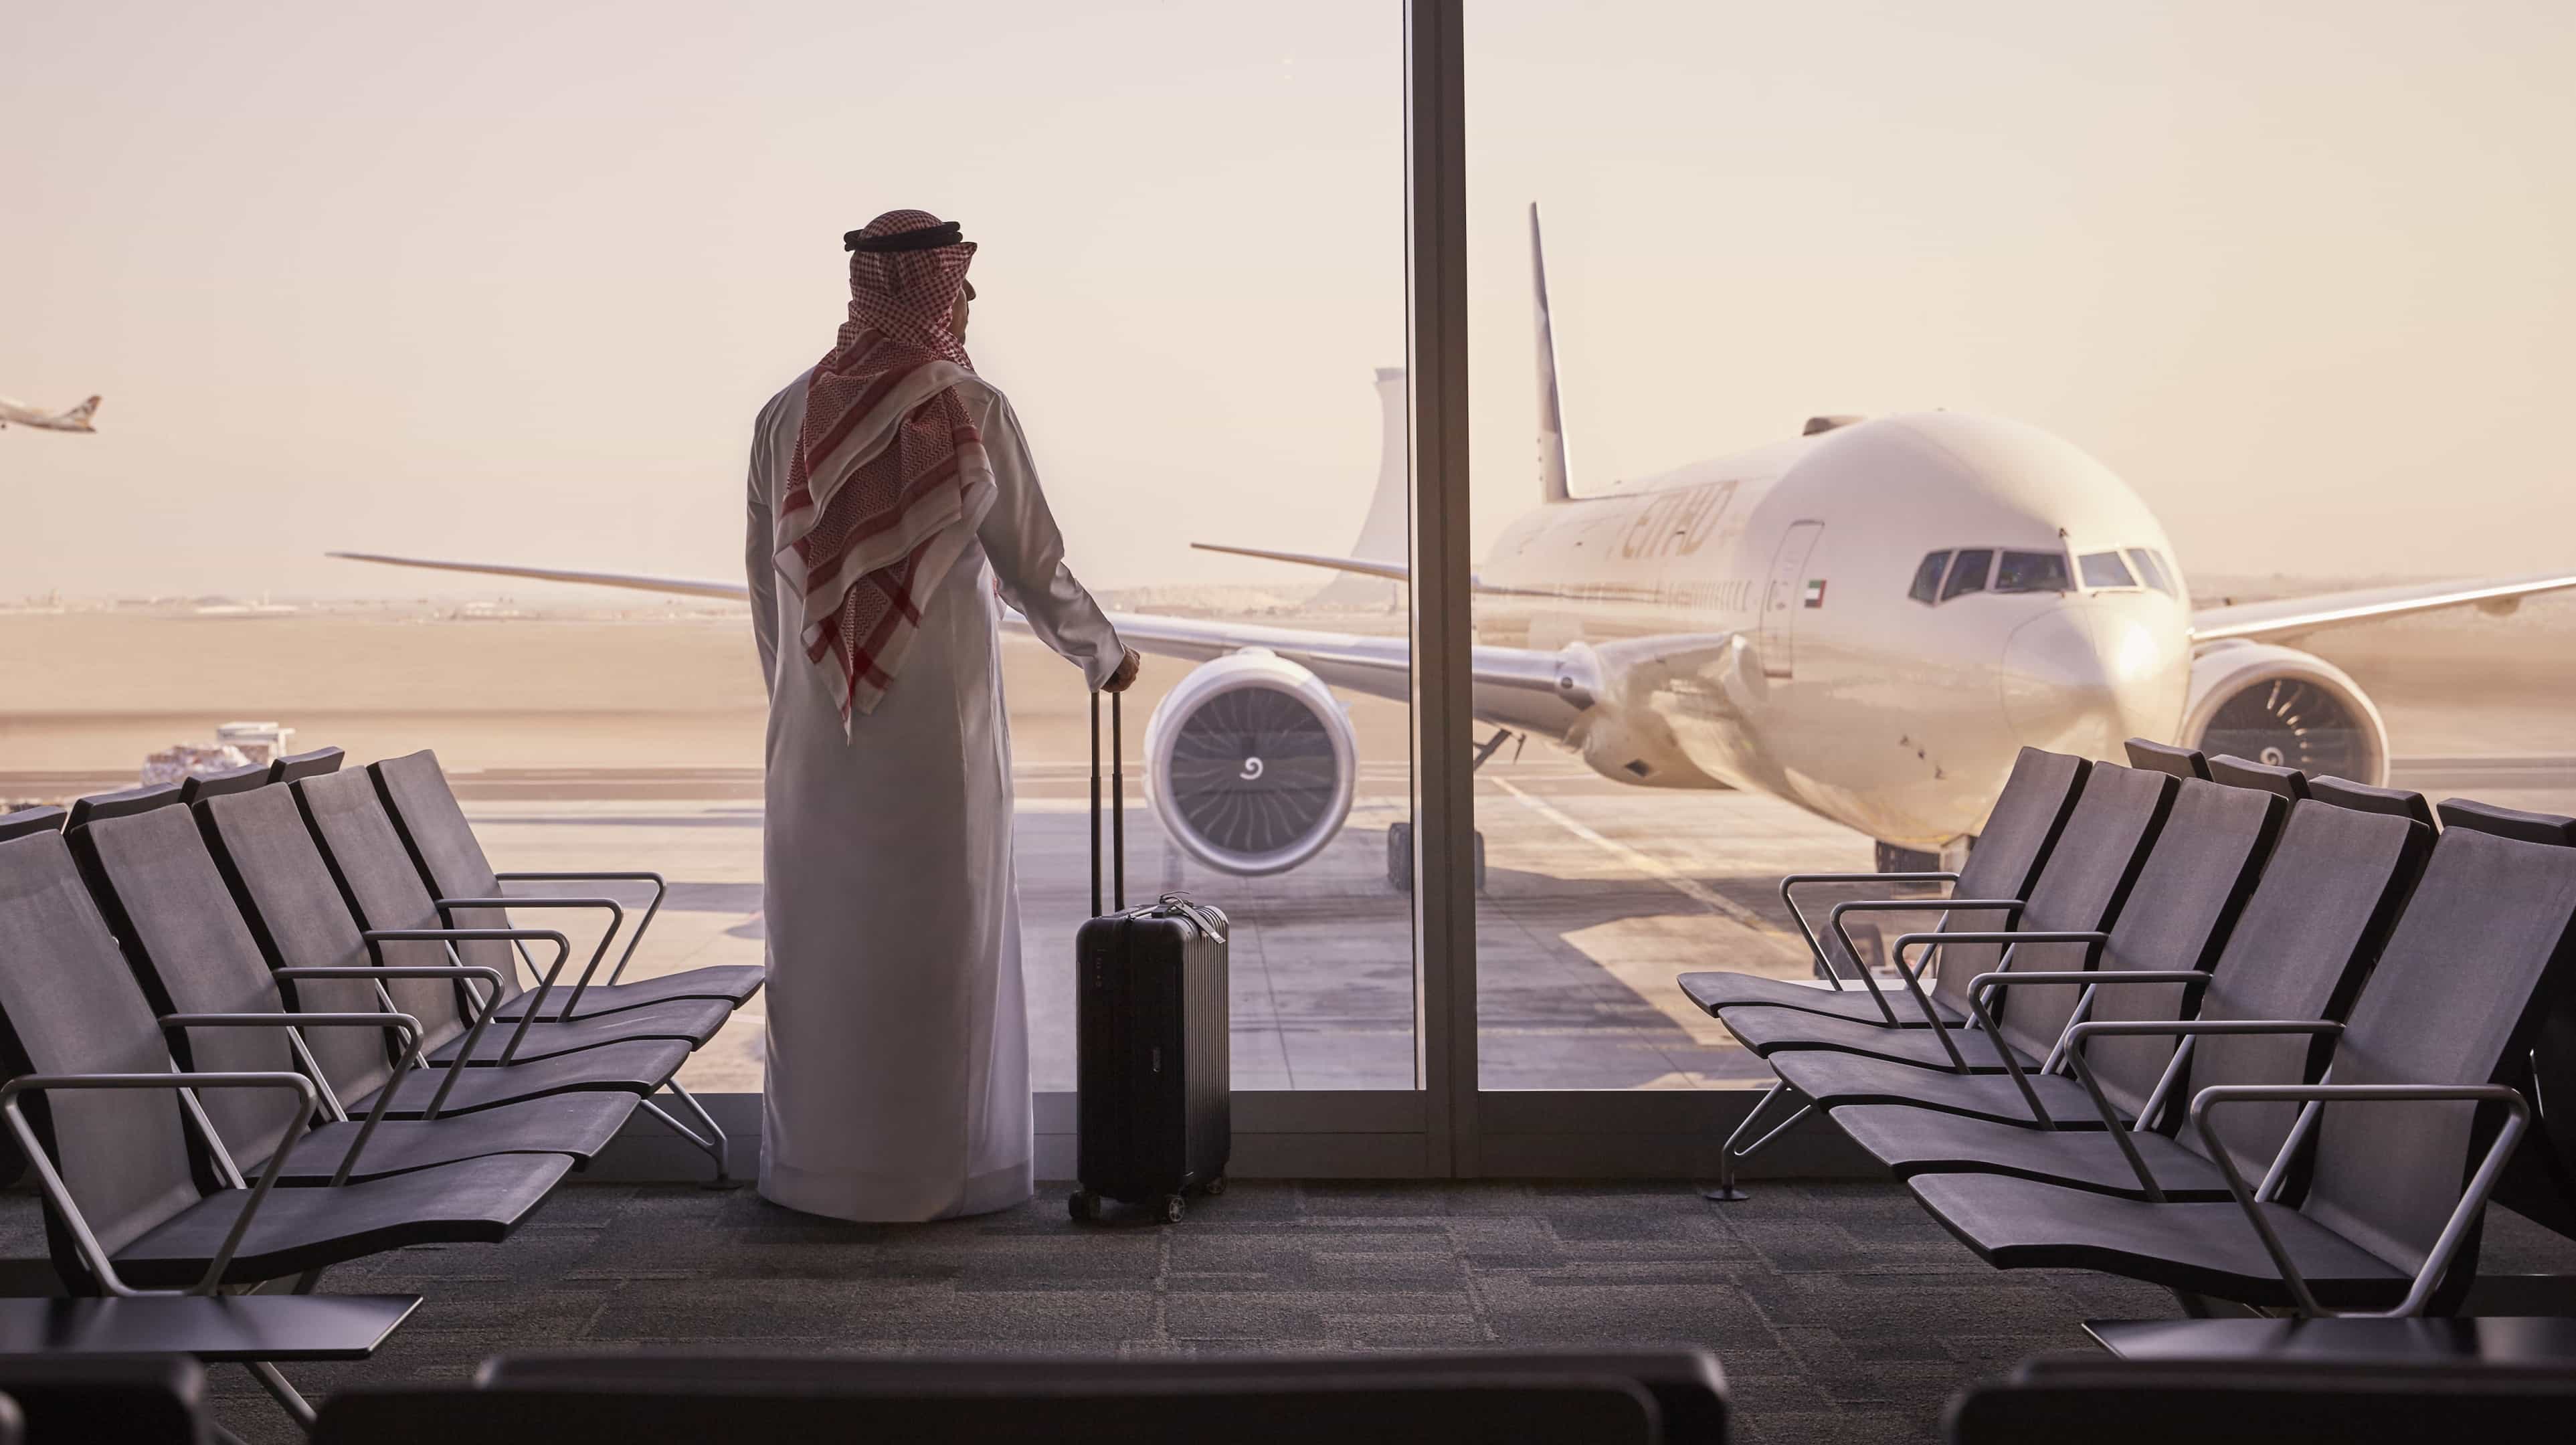 Emirati business man standing in an airport lounge looking out the window at an airplane